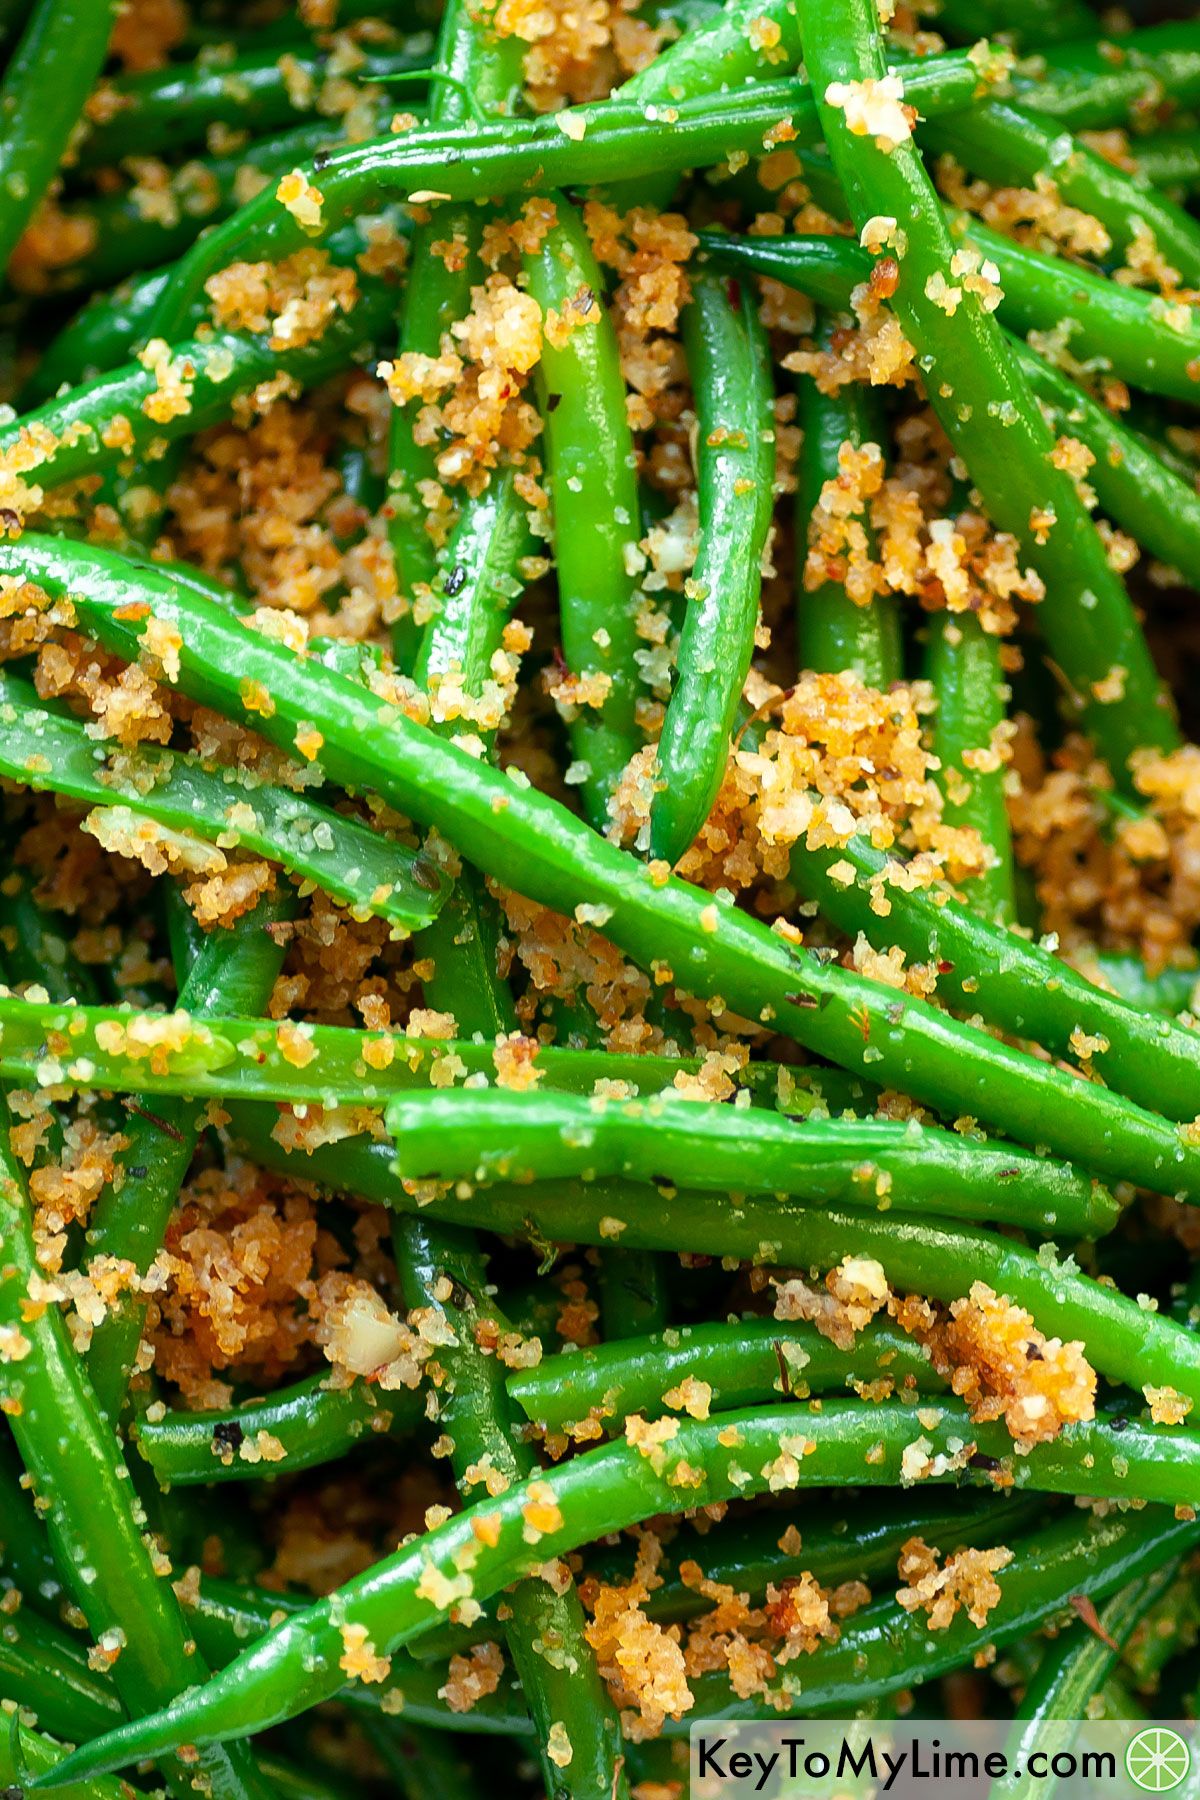 A close up image of Italian green beans coated in seasoned bread crumbs.